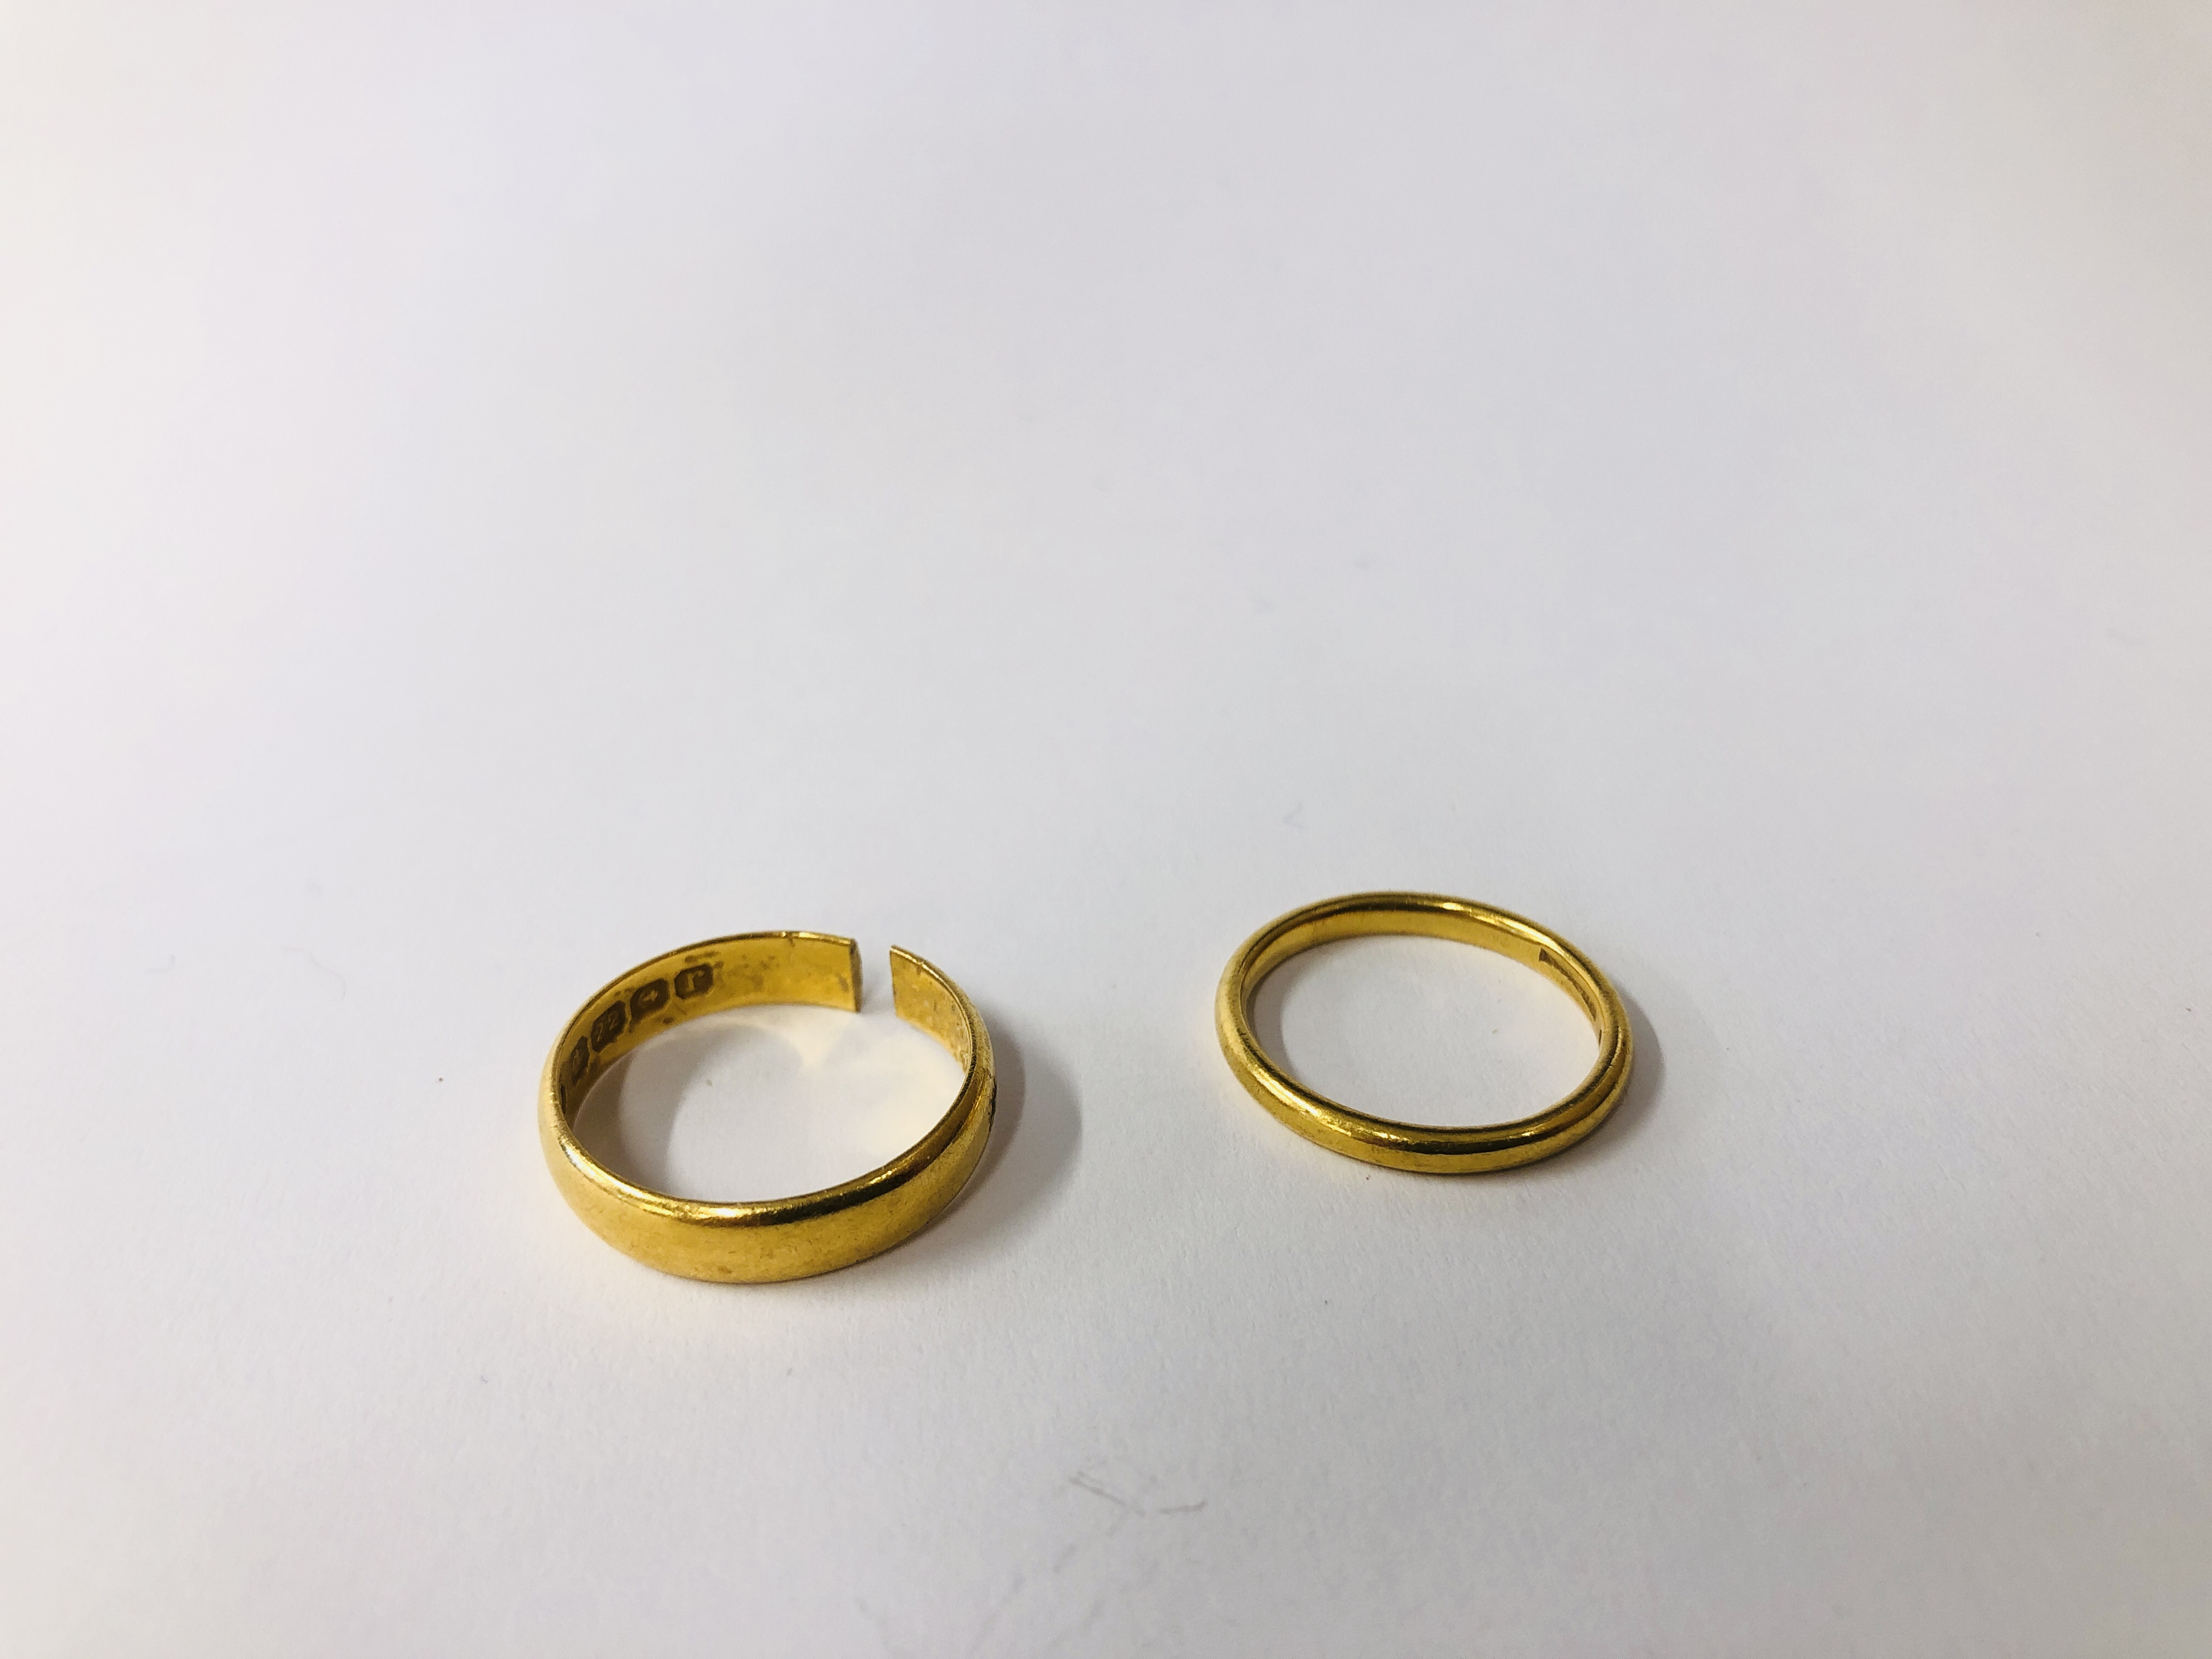 A LADIES 22CT GOLD WEDDING BAND AND A FURTHER 22CT GOLD WEDDING BAND (CUT).